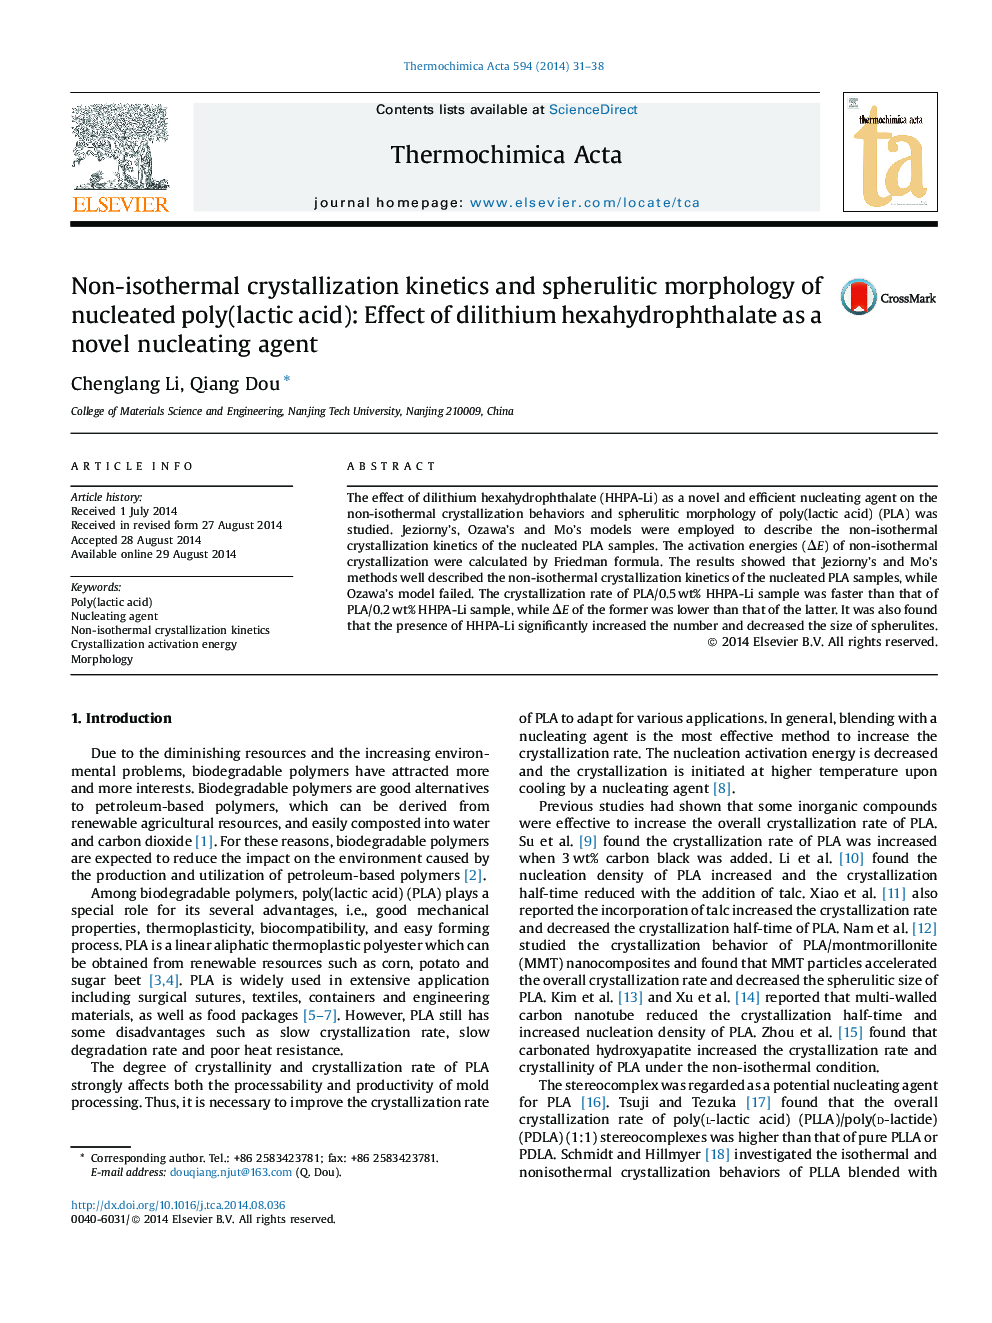 Non-isothermal crystallization kinetics and spherulitic morphology of nucleated poly(lactic acid): Effect of dilithium hexahydrophthalate as a novel nucleating agent